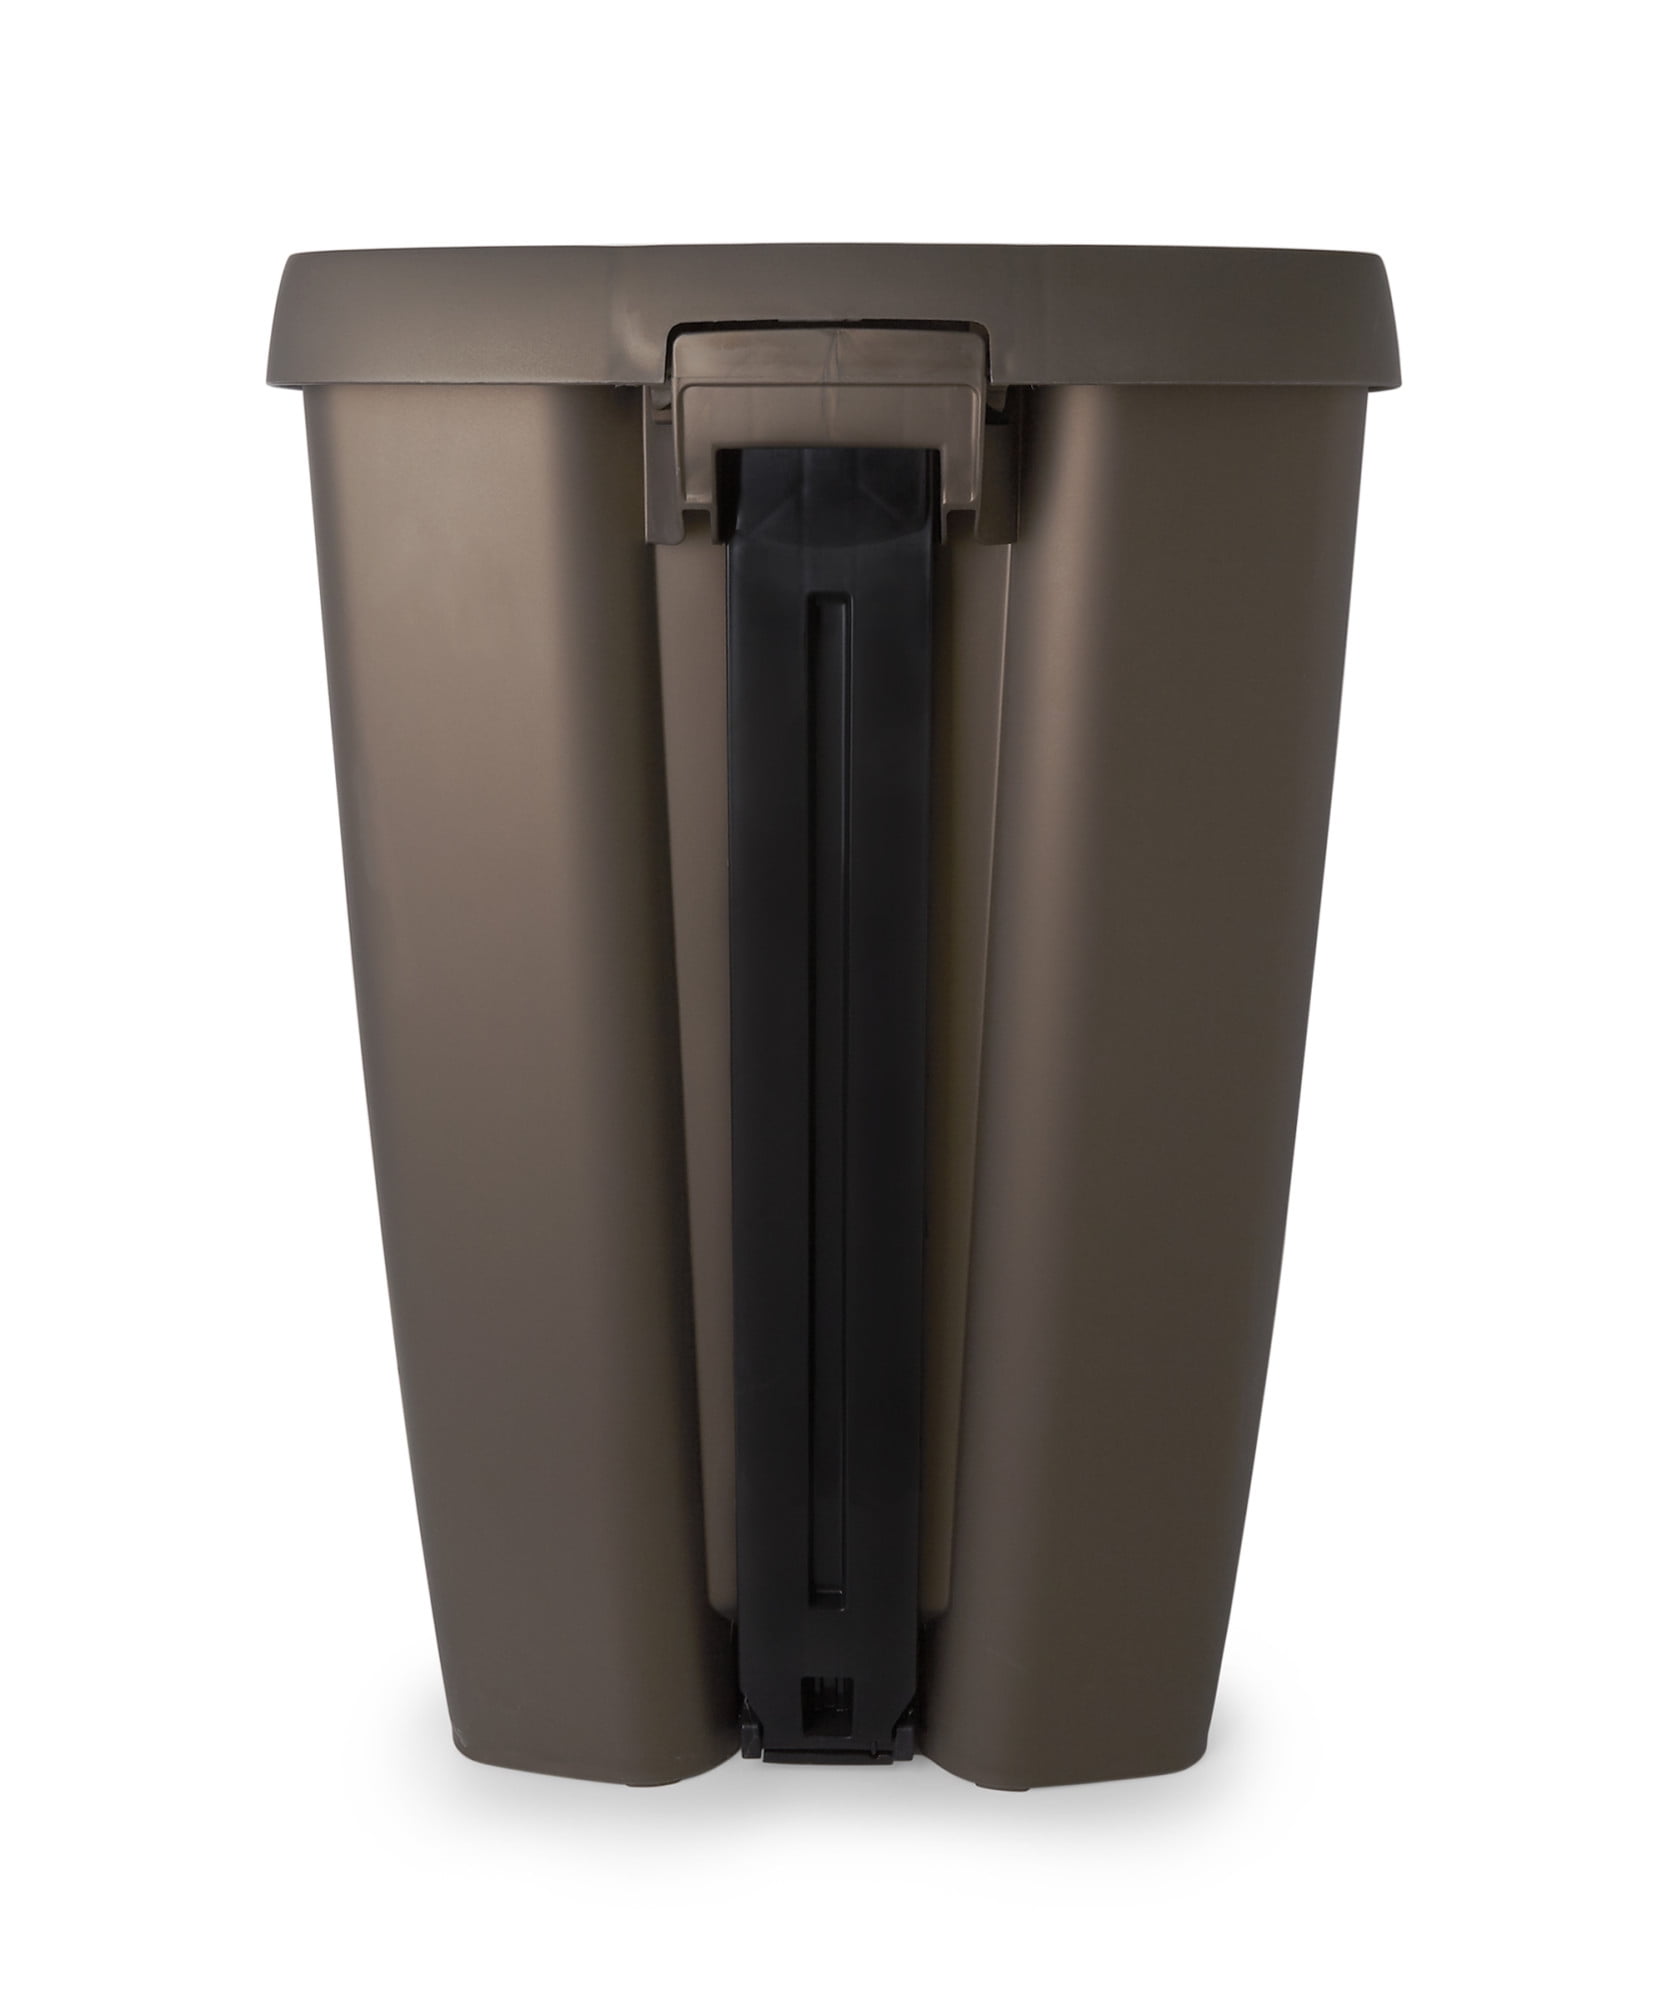 Stainless Steel 13-Gallon Kitchen Trash Can with Step Lid in Copper Bronze  - Q&C Home